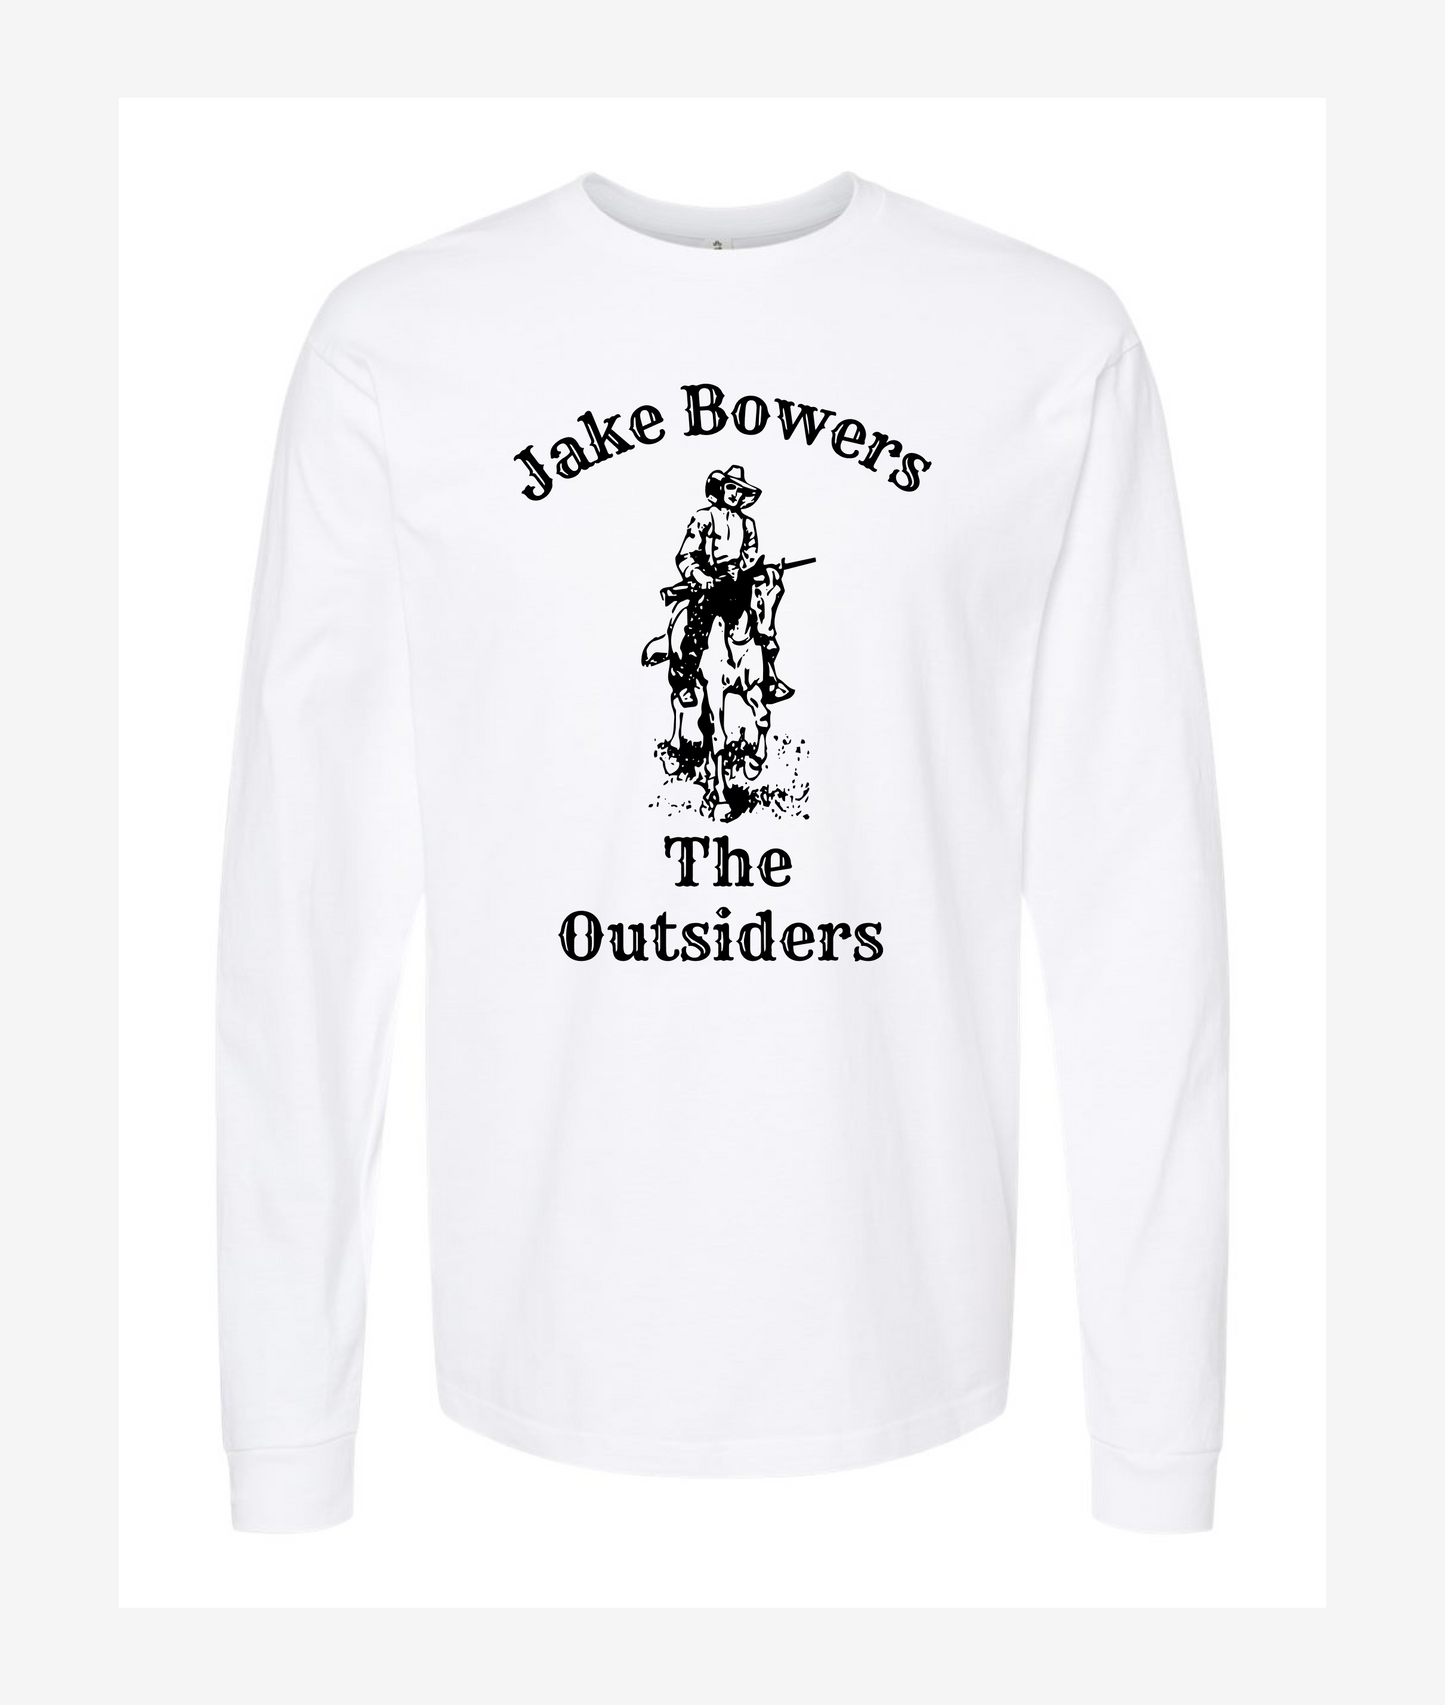 Jake Bowers Swag - The Outsiders - White Long Sleeve T